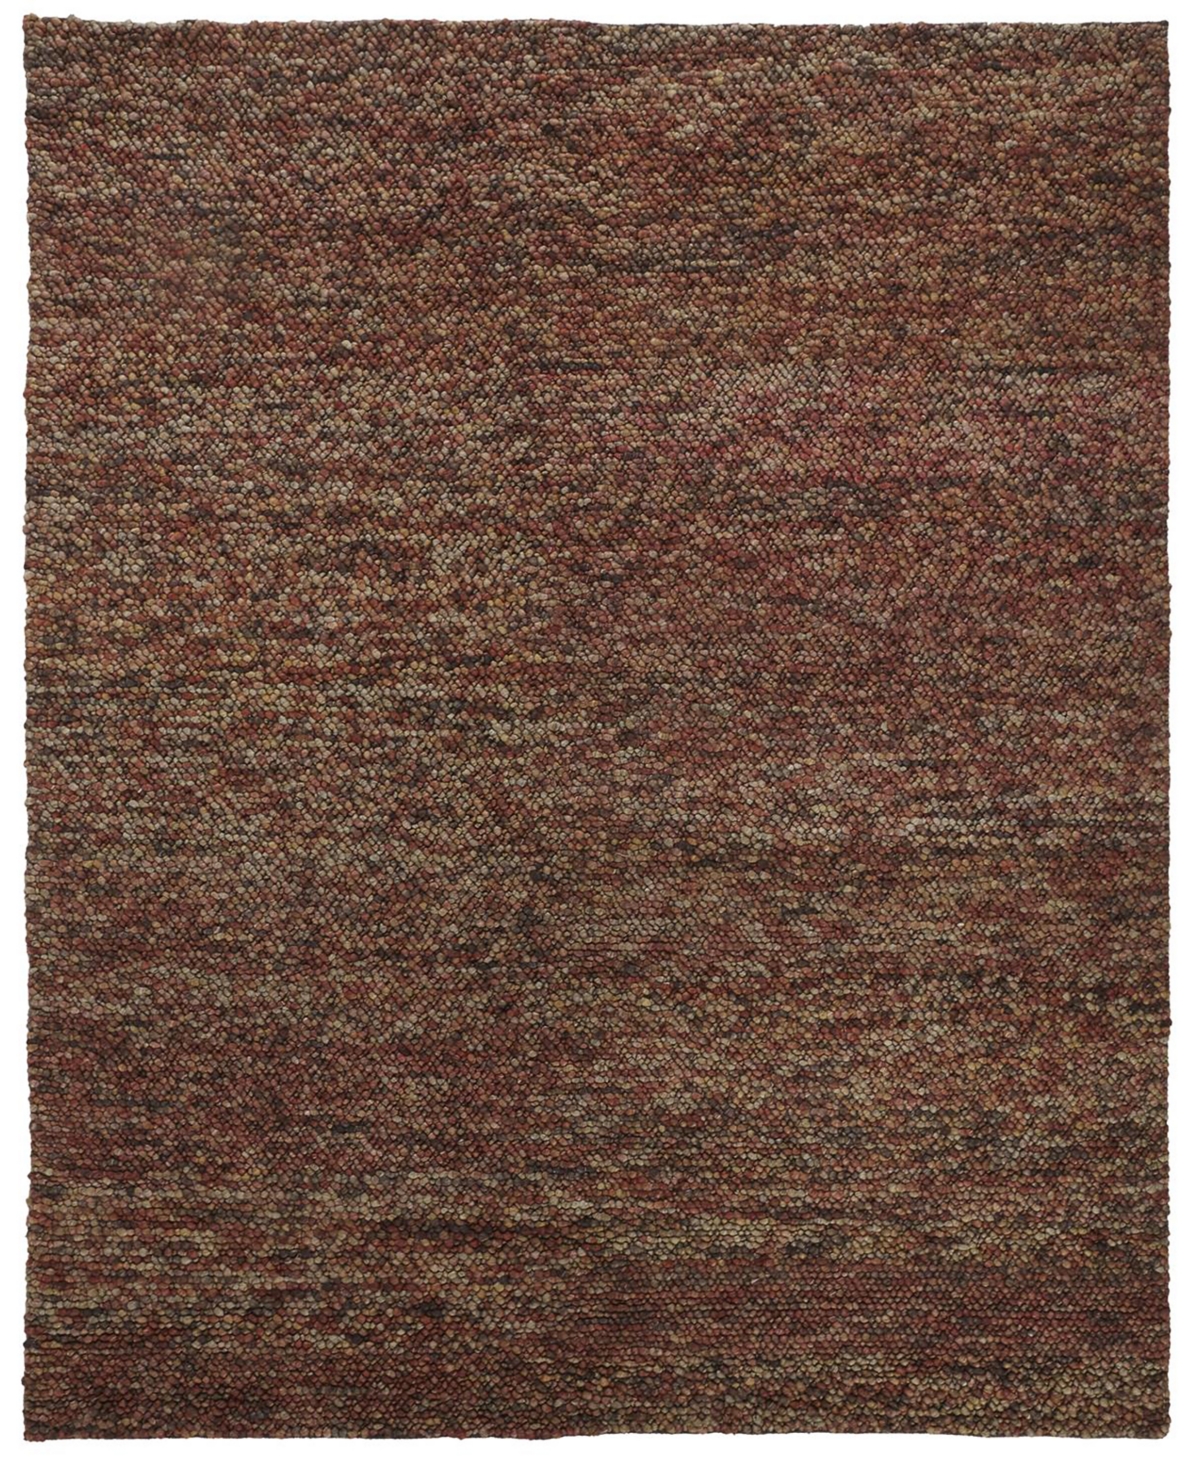 Feizy Sheldrick SHE0821 3'6in x 5'6in Area Rug - Rust, Brown